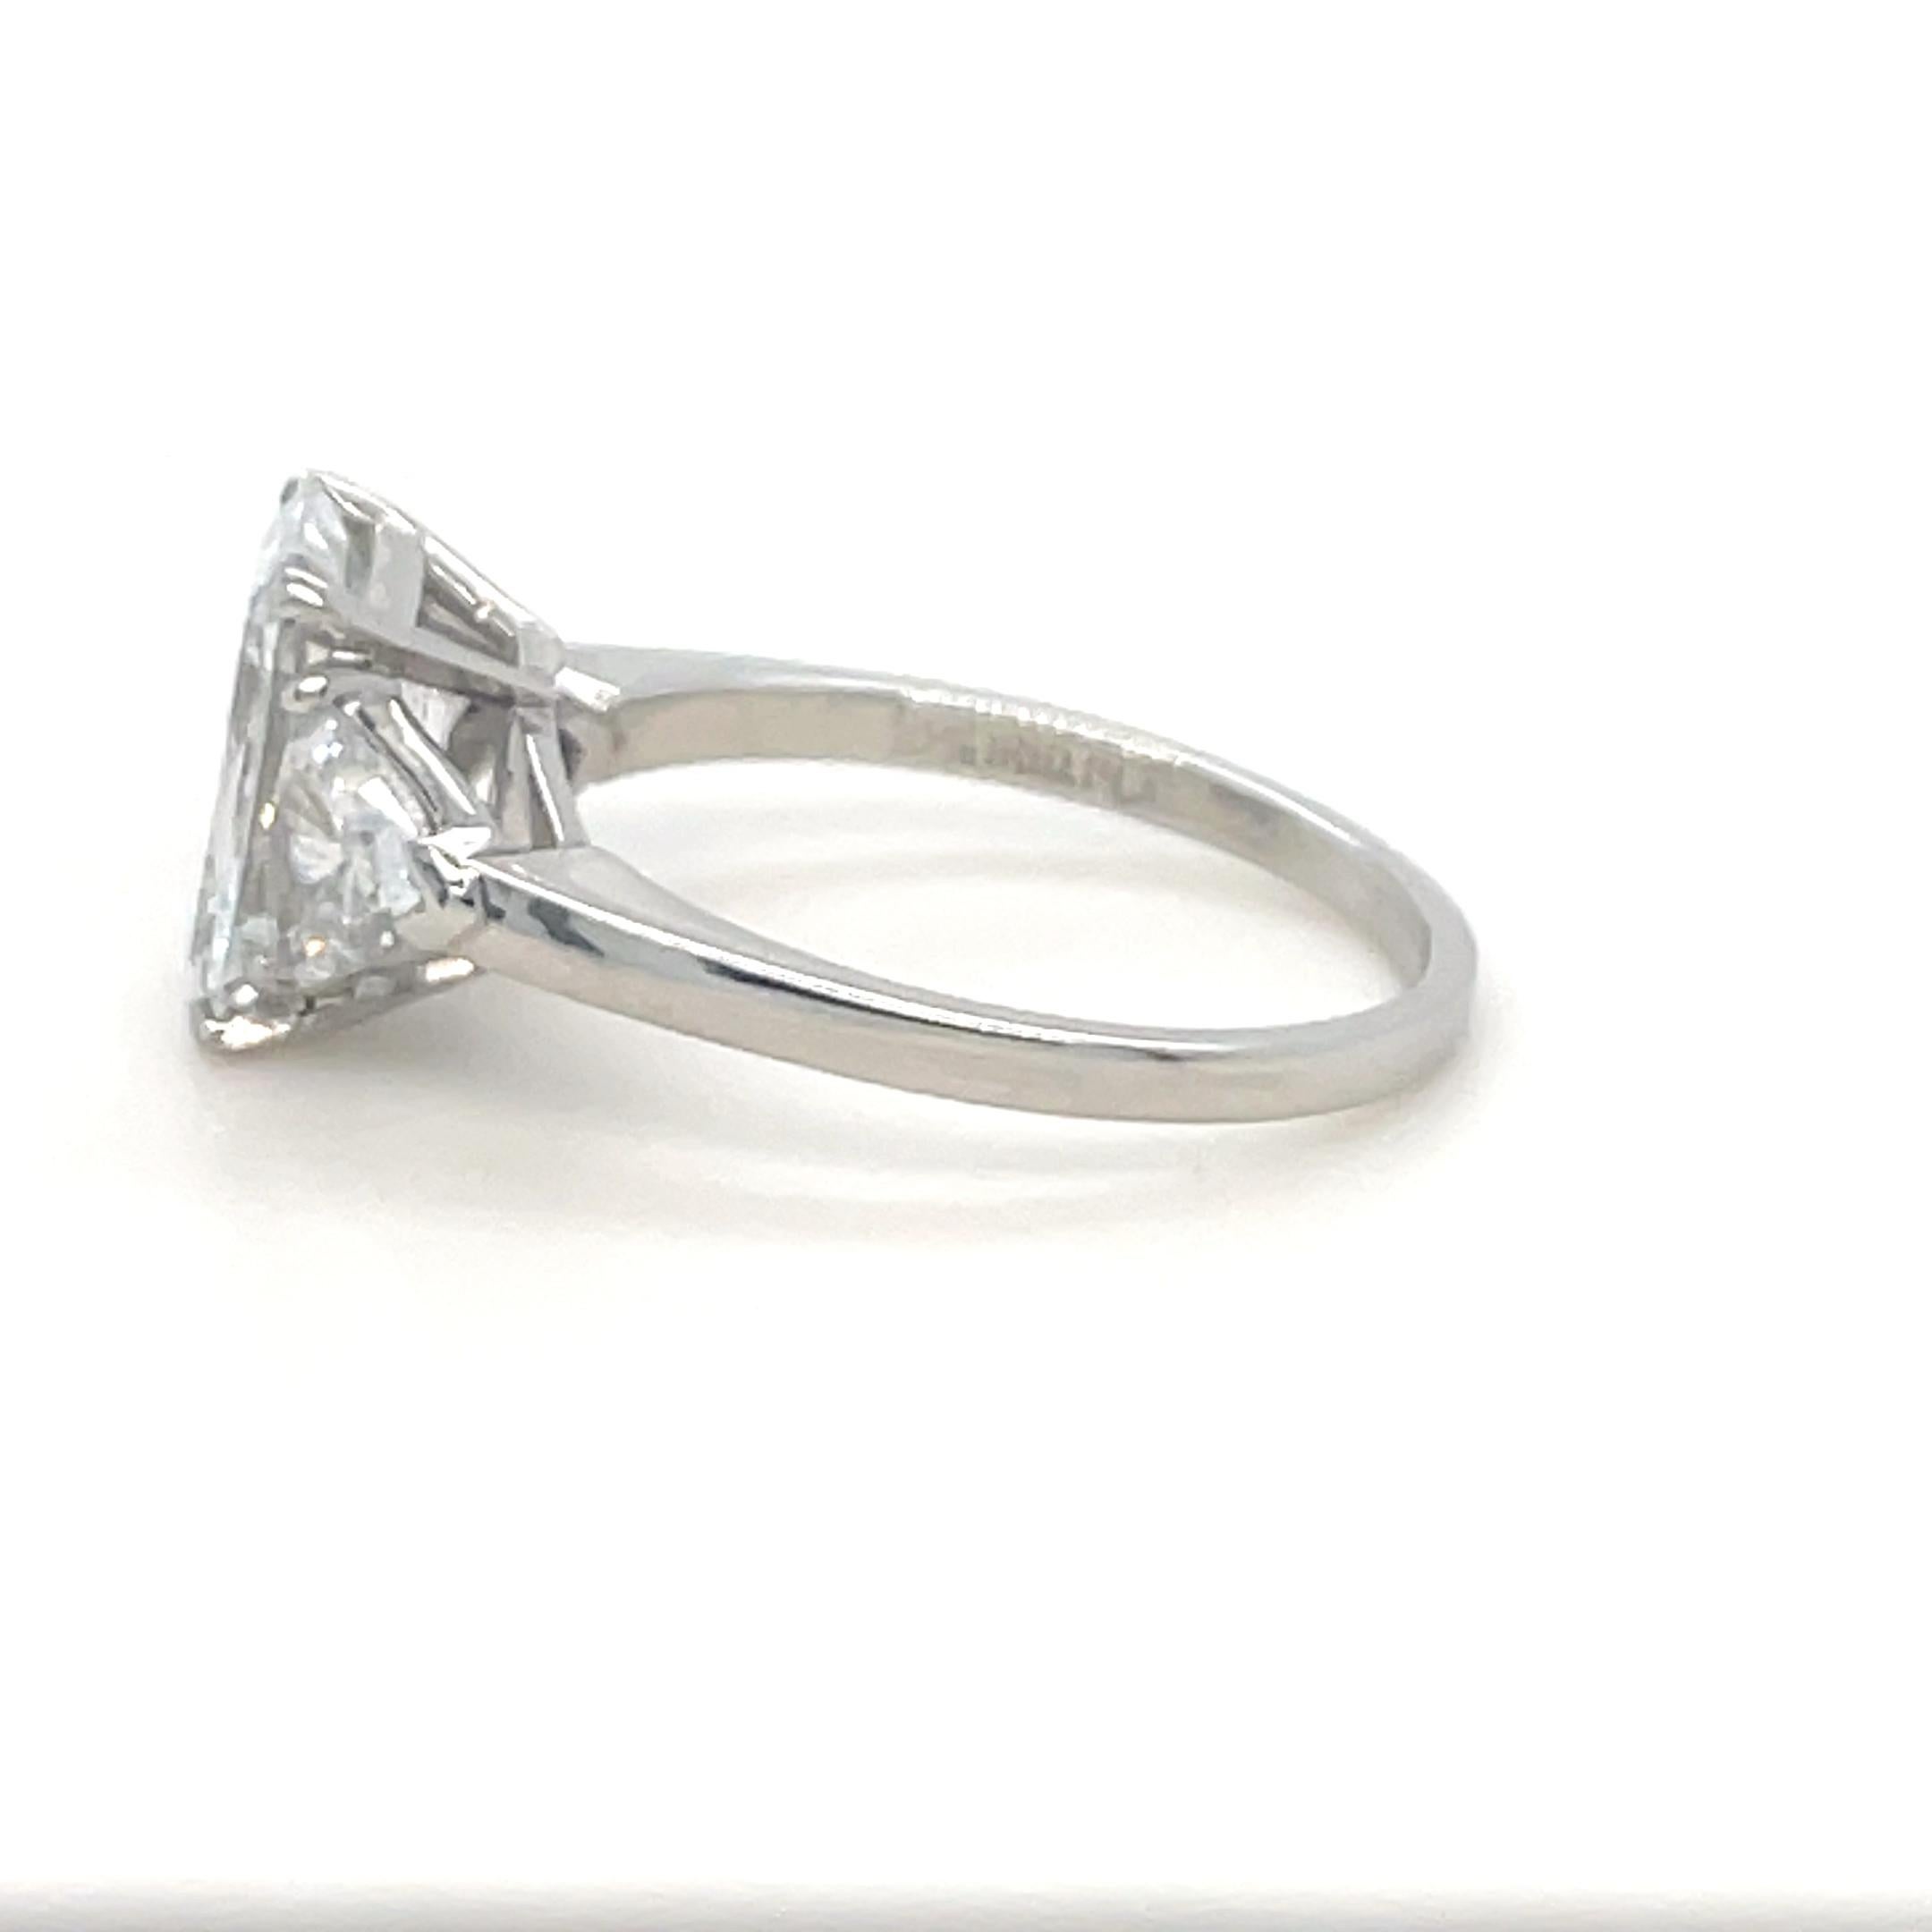 This absolutely stunning three stone diamond ring by Cartier features a 3.00 carat emerald cut diamond with F color and VS1 clarity, flanked by two trillion cut diamonds weighing approximately 1.00 carat total. Mounted in platinum and crafted with